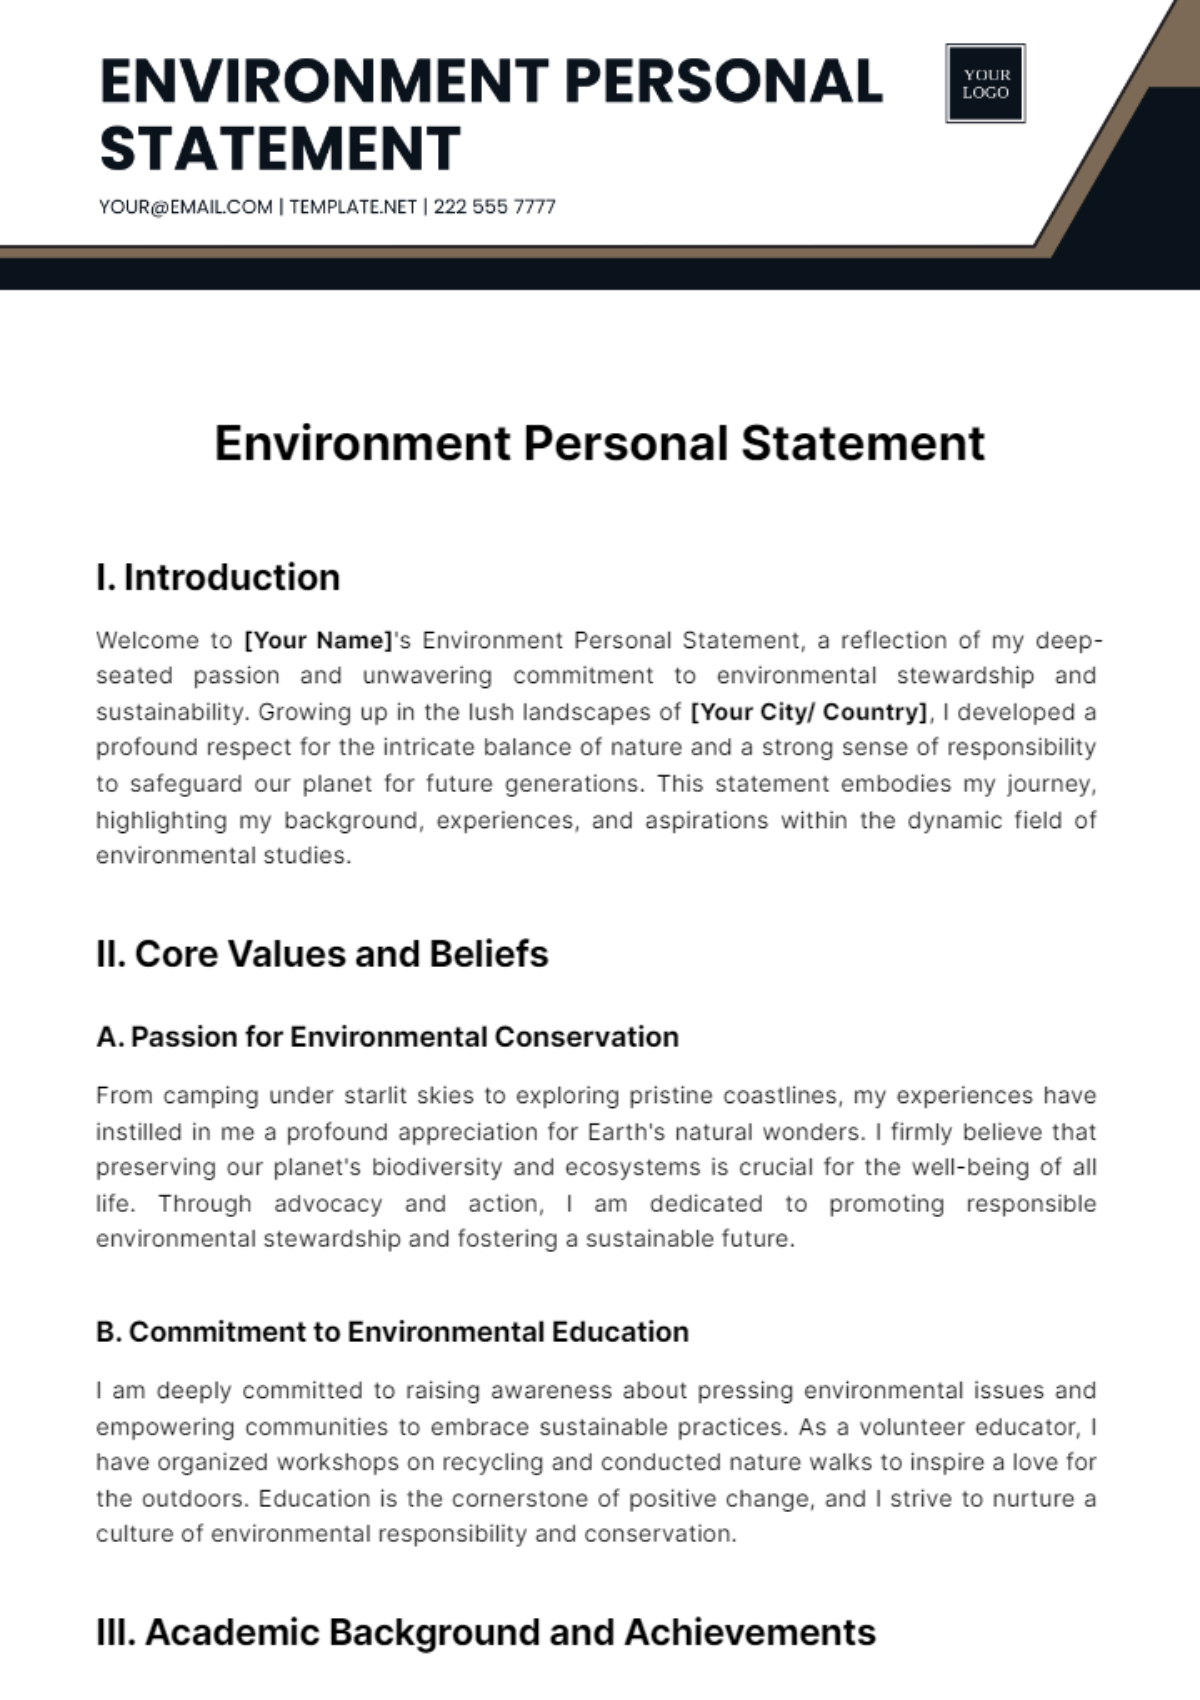 Environment Personal Statement Template